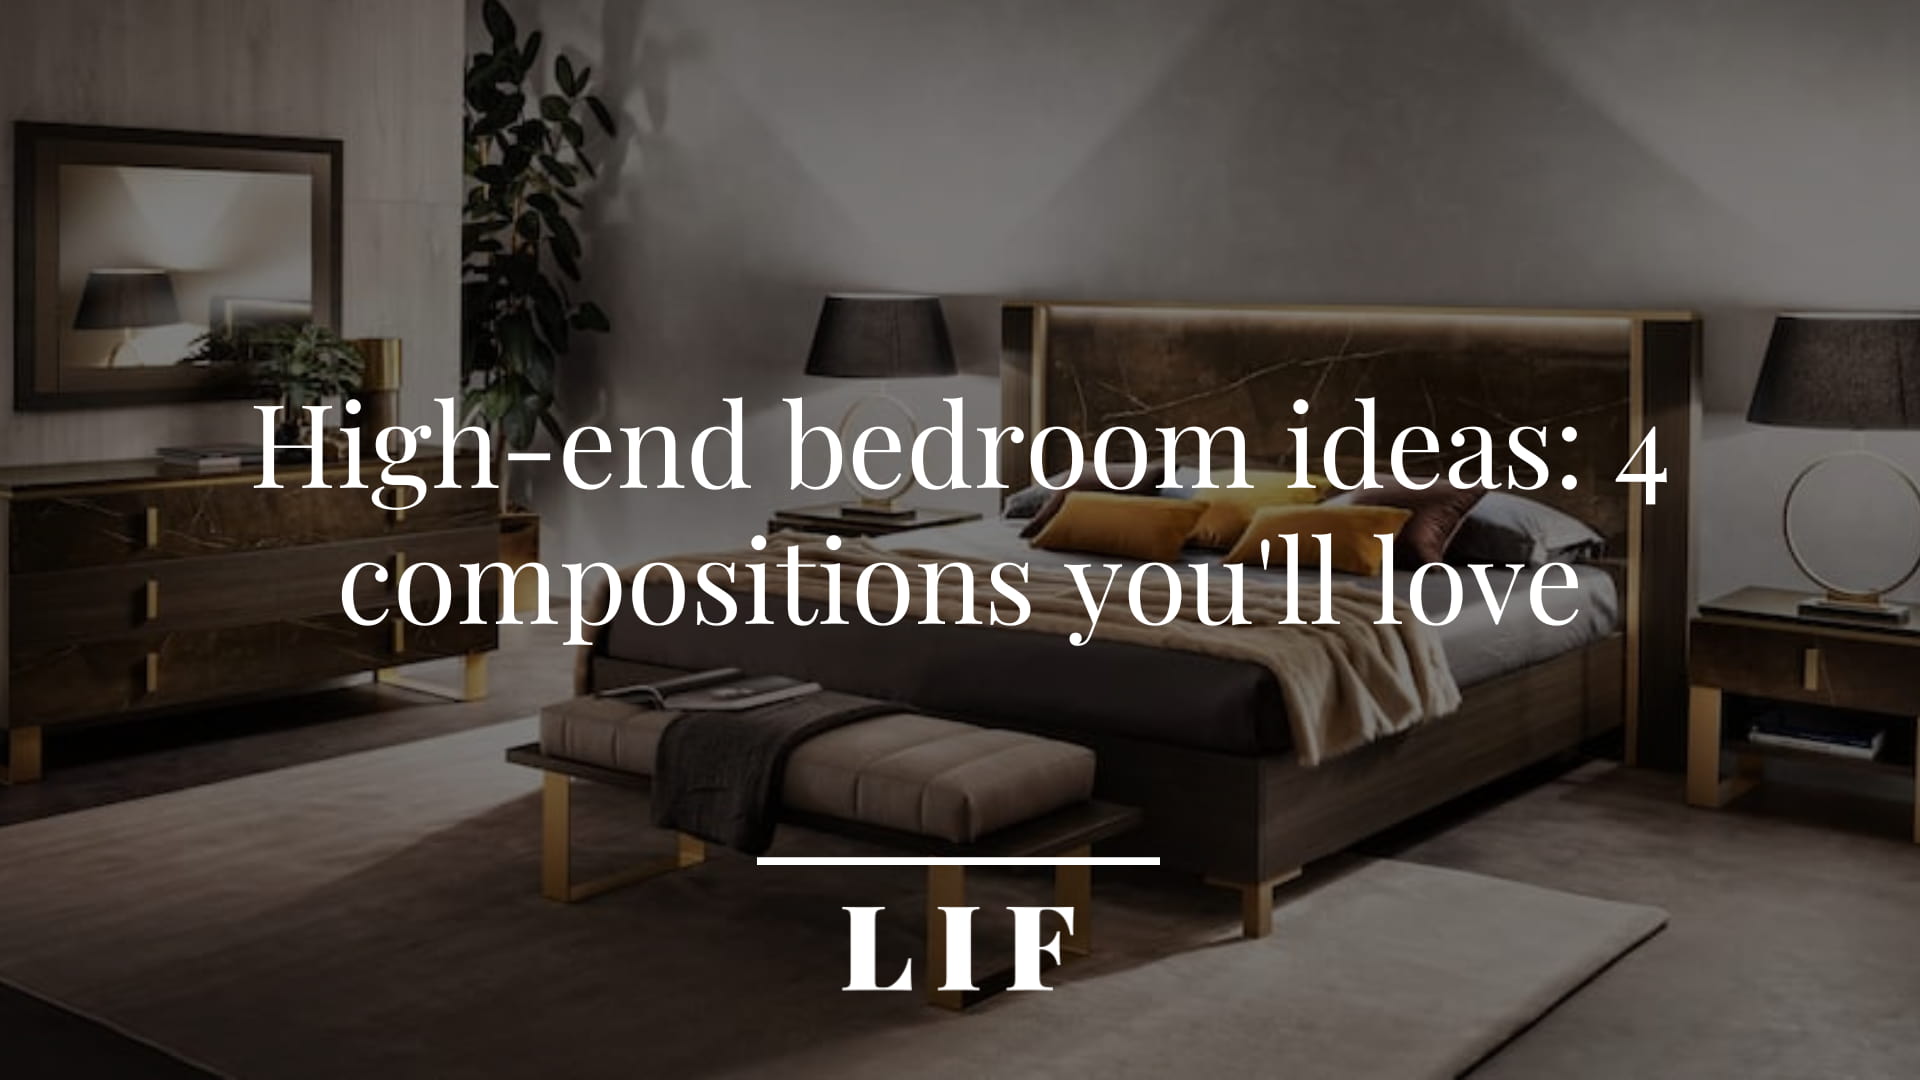 High-end bedroom ideas: 4 compositions you'll love